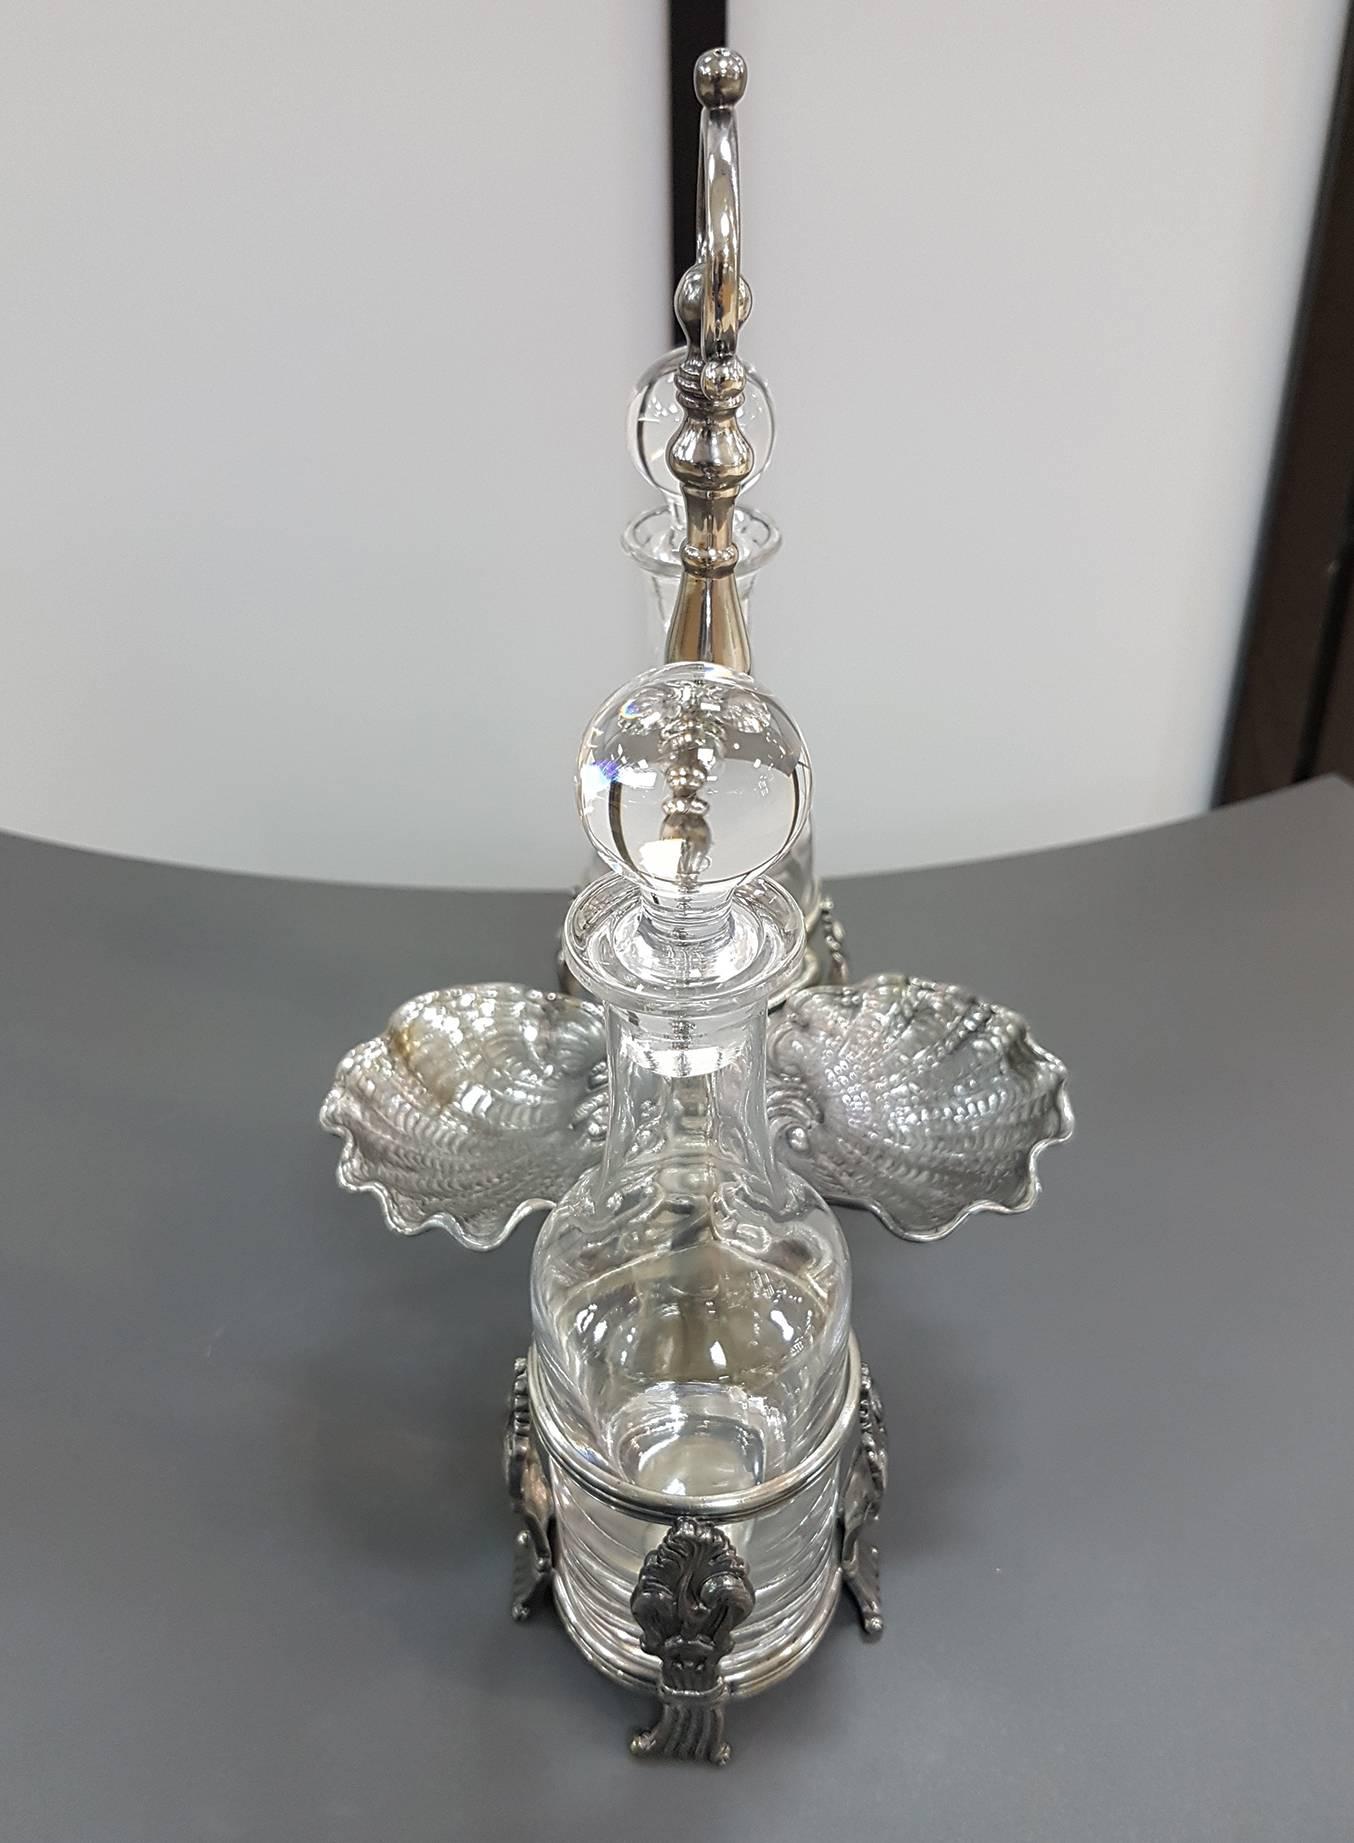 Silver 800°°/°°° Cruet - Venetian Art replica.
The original 18th century is from a private collection
The two bottle racks are made up of chiselled scrolls that also act as feet
Two large ribbed shells form the salt holder

